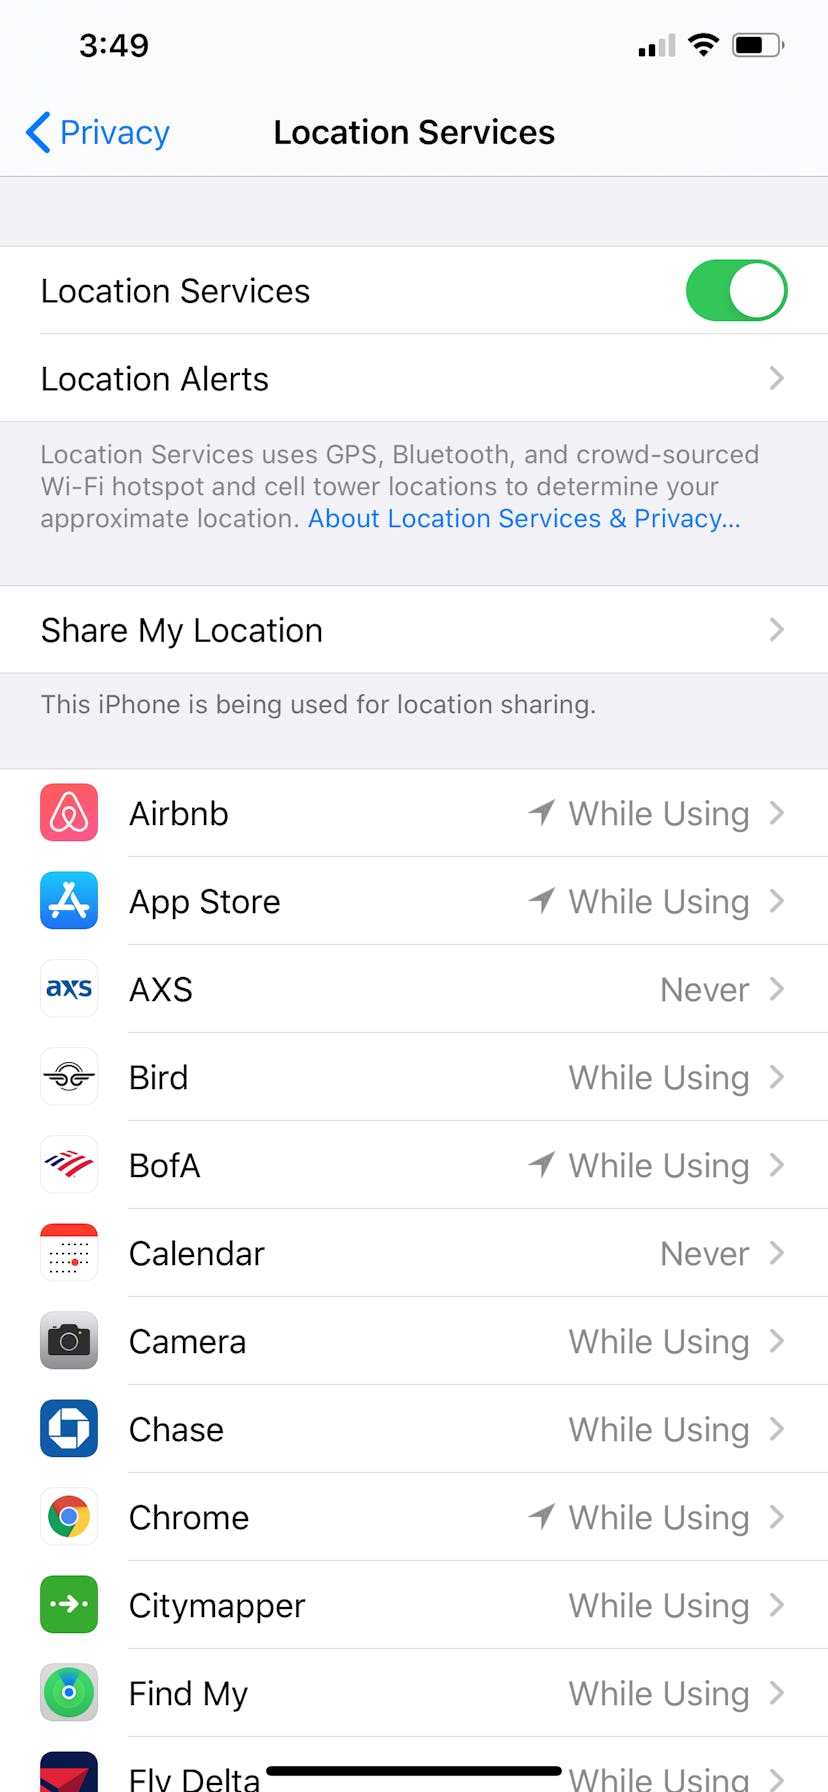 This is a screenshot for location services, which you should be aware of for data privacy.